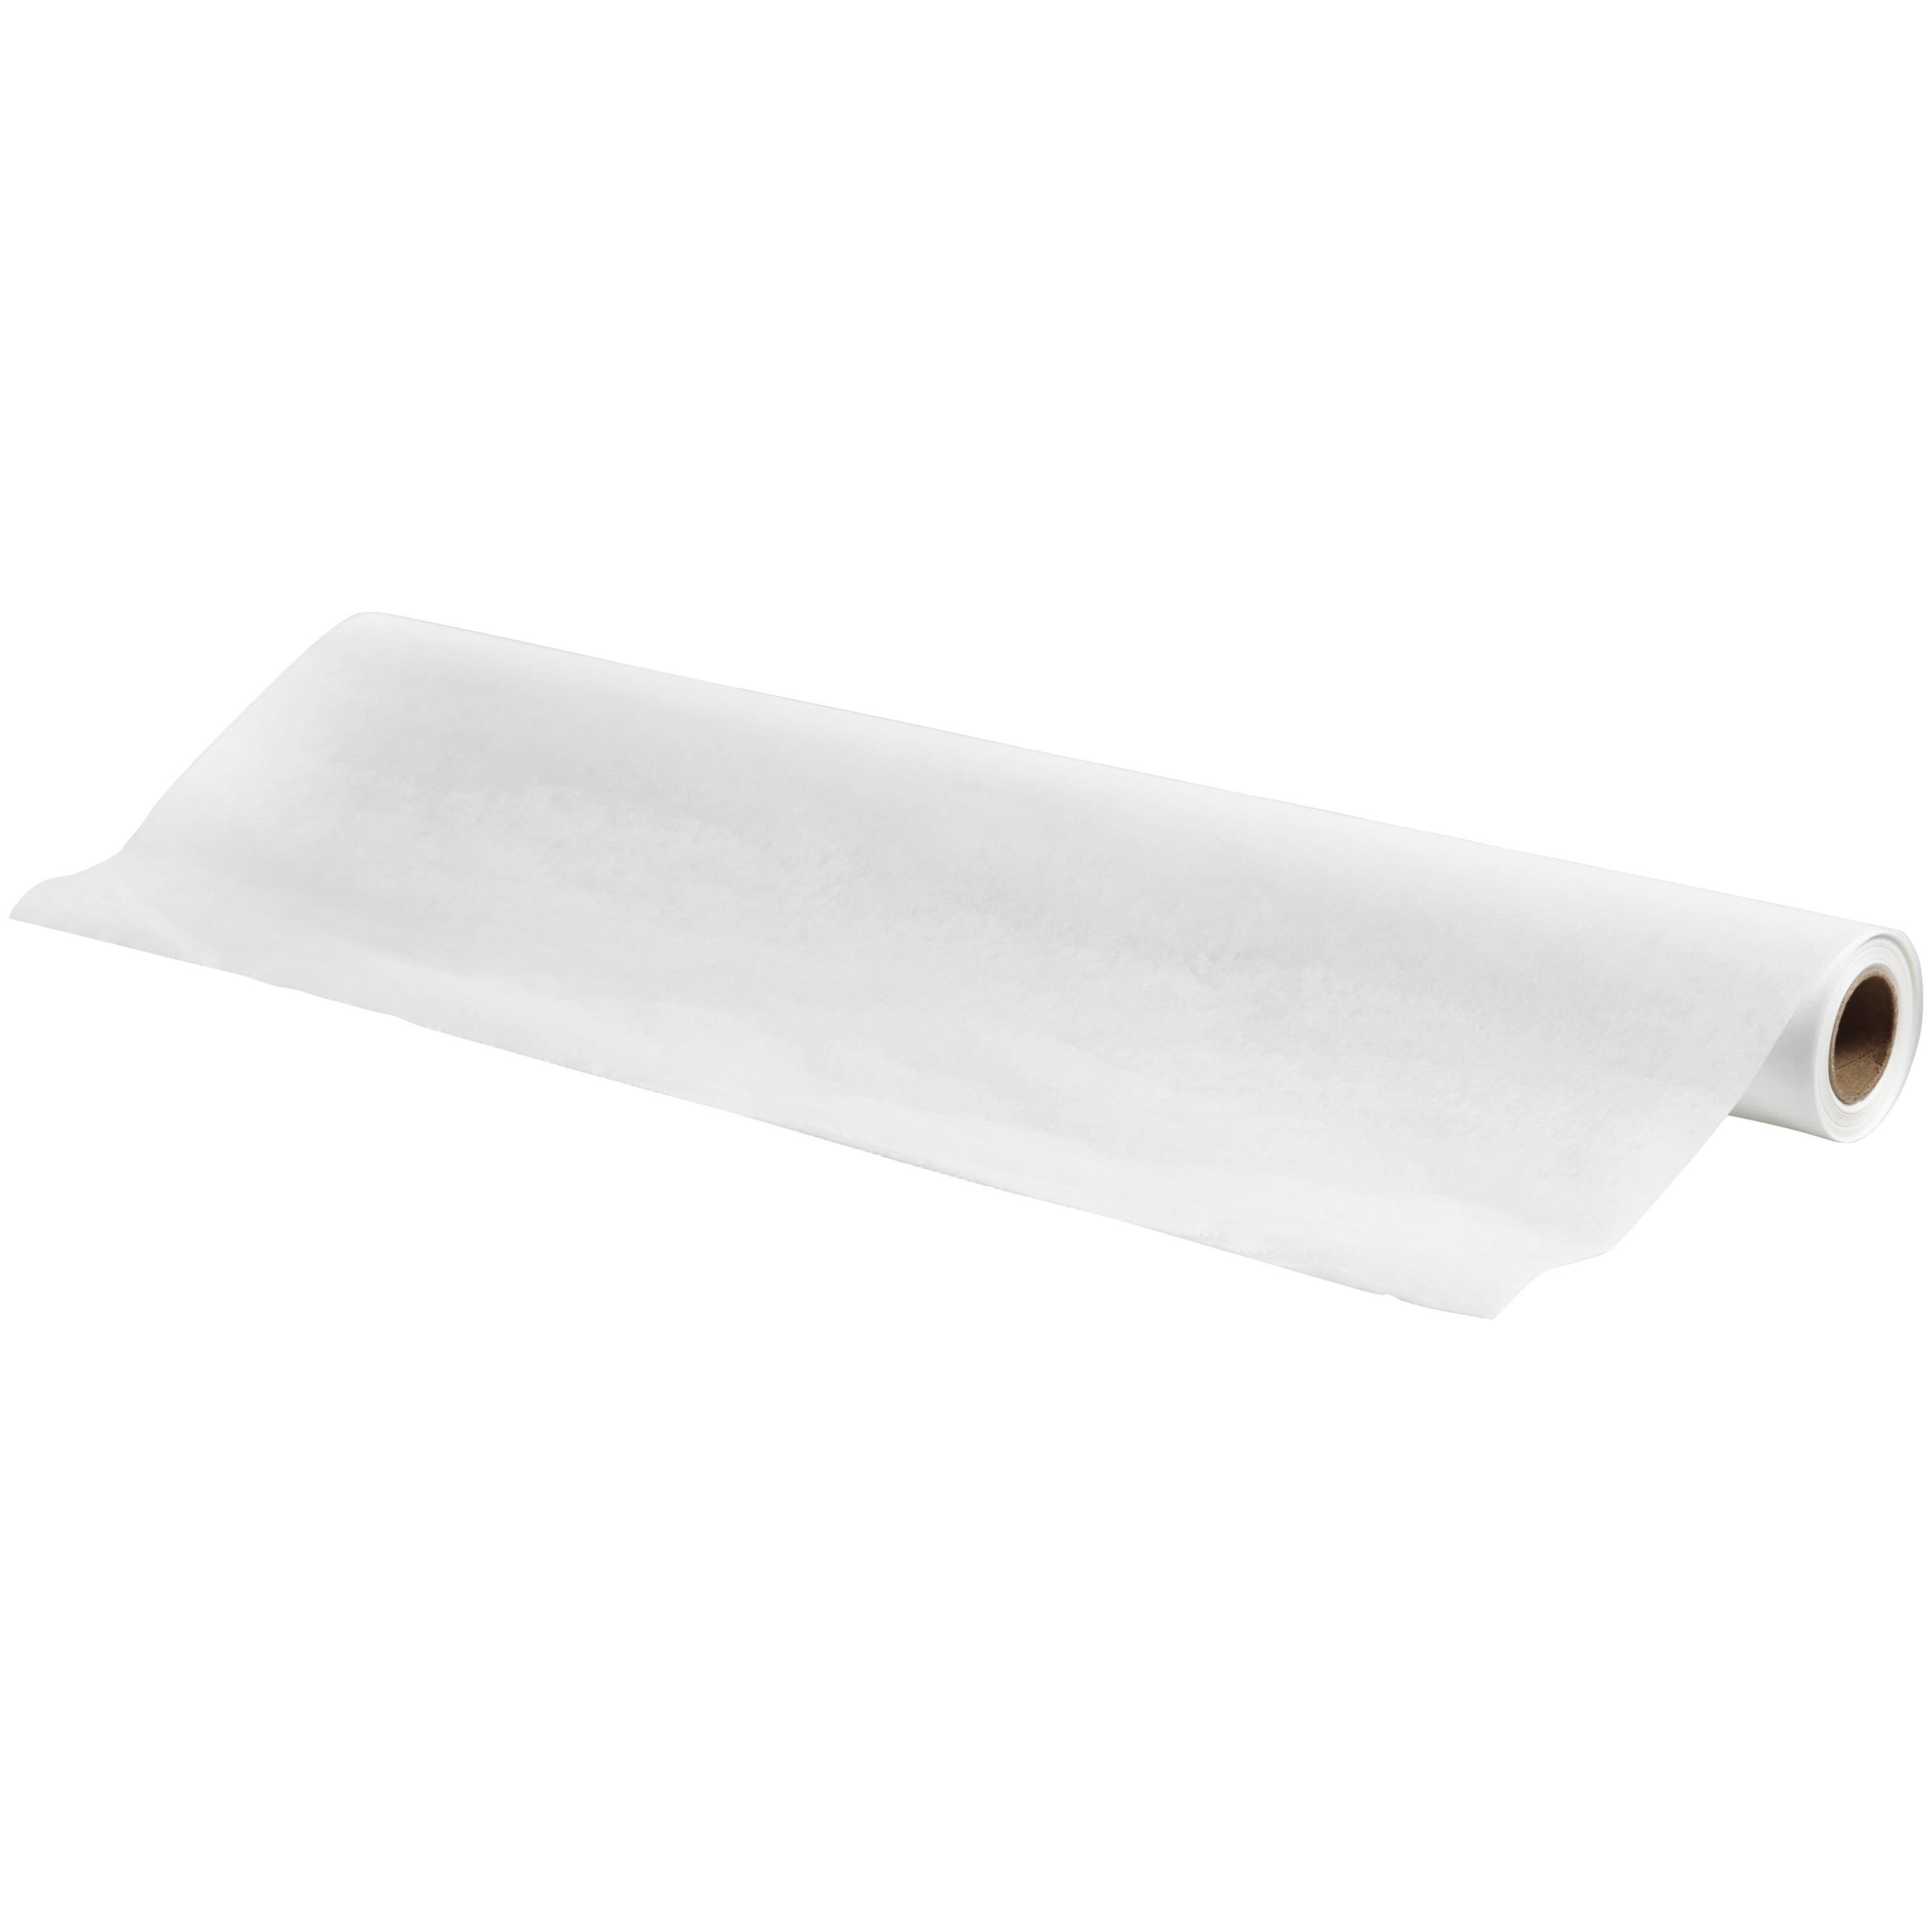 ChicWrap Parchment Paper Refill Roll - 15 x 66' (82 sq ft)